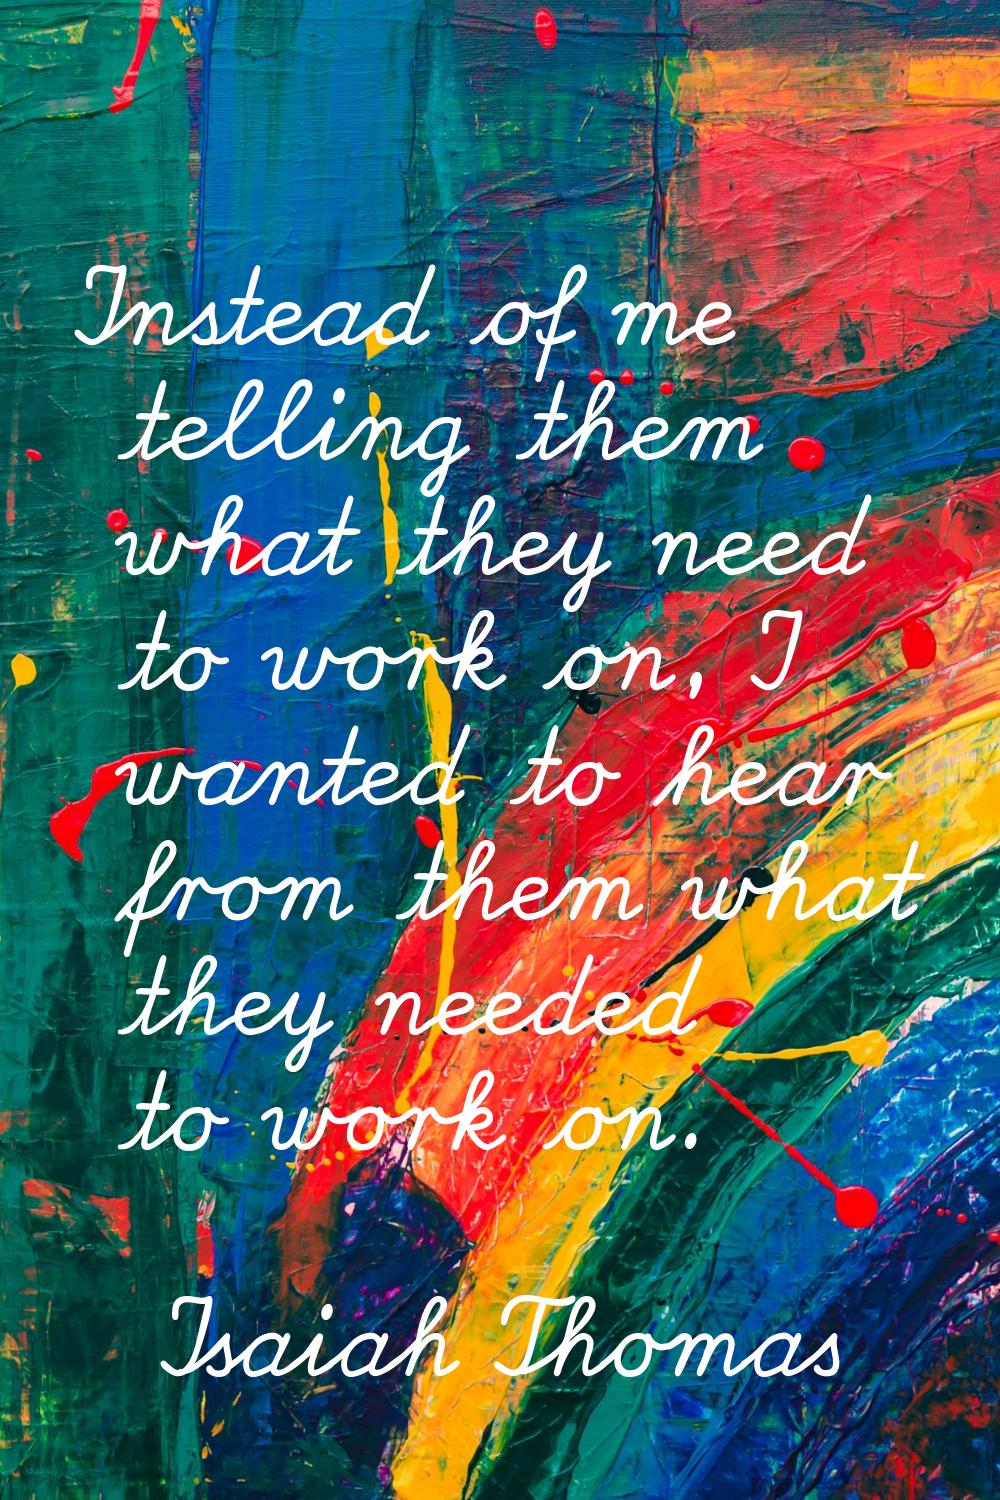 Instead of me telling them what they need to work on, I wanted to hear from them what they needed t